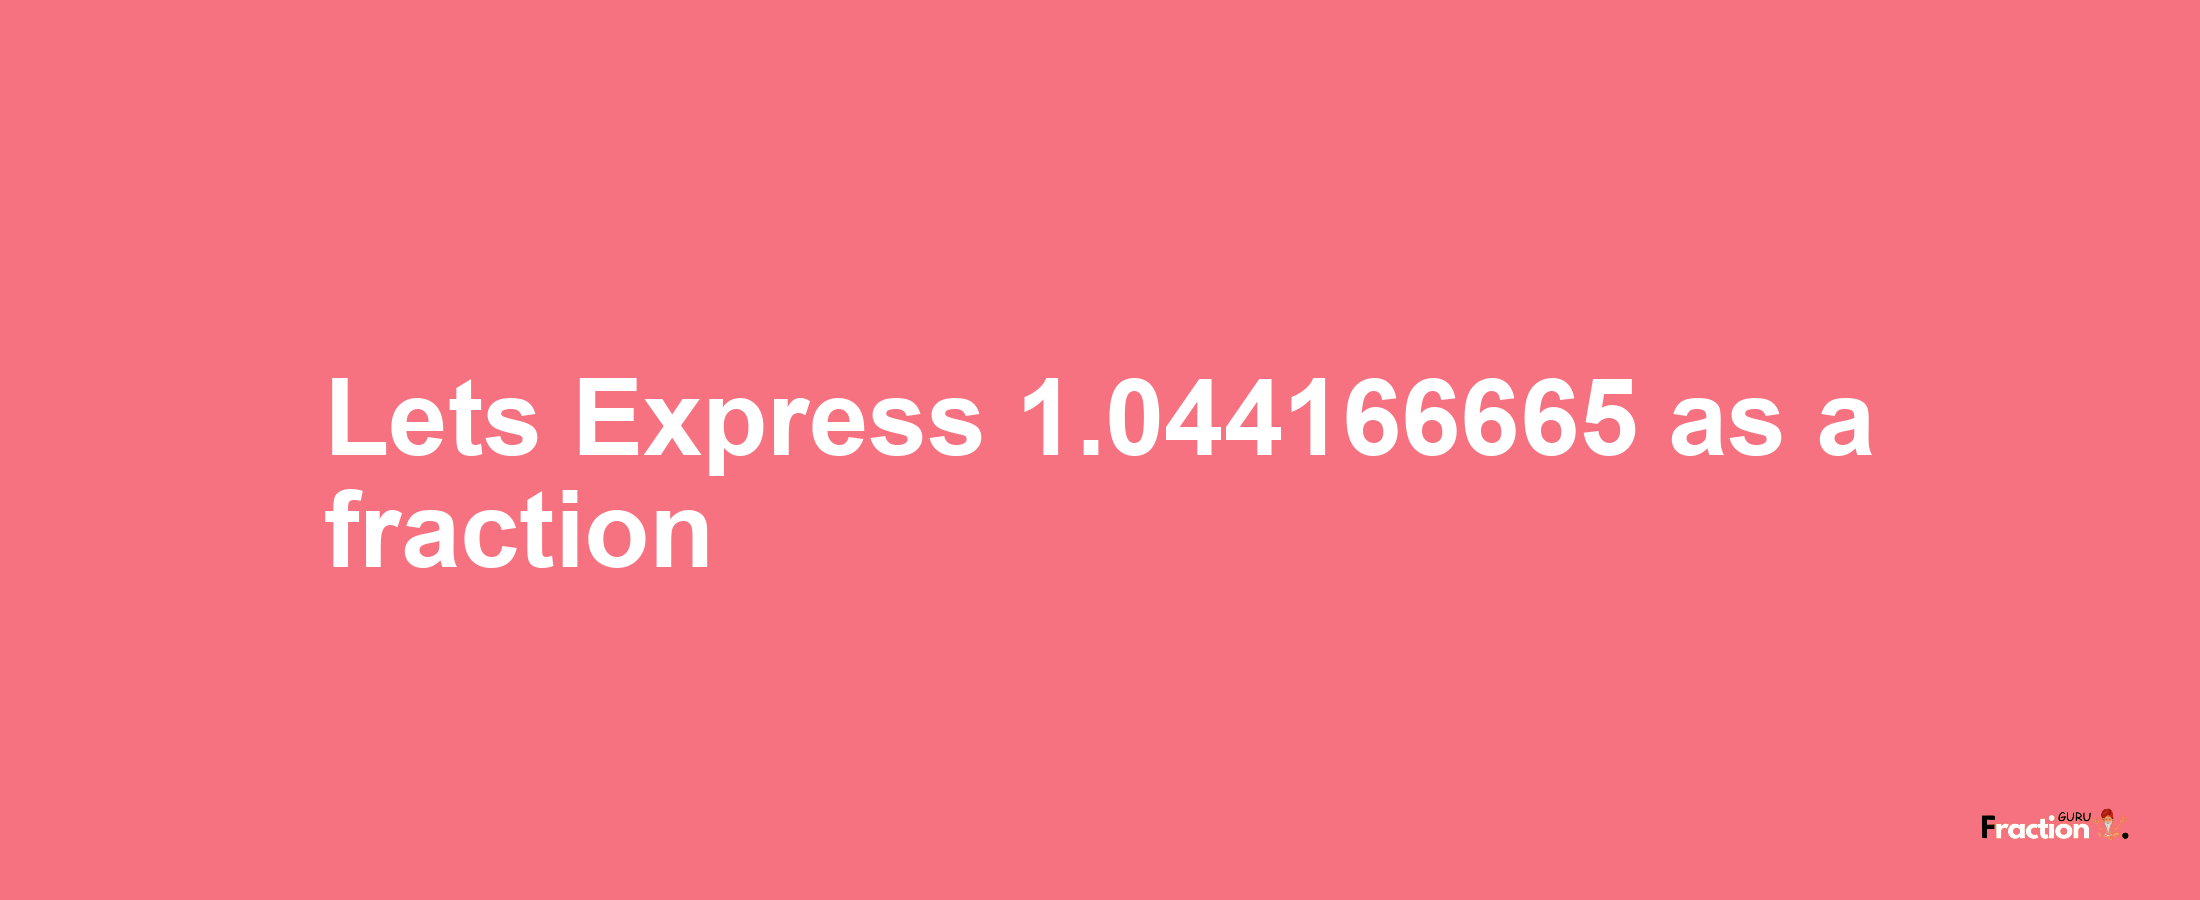 Lets Express 1.044166665 as afraction